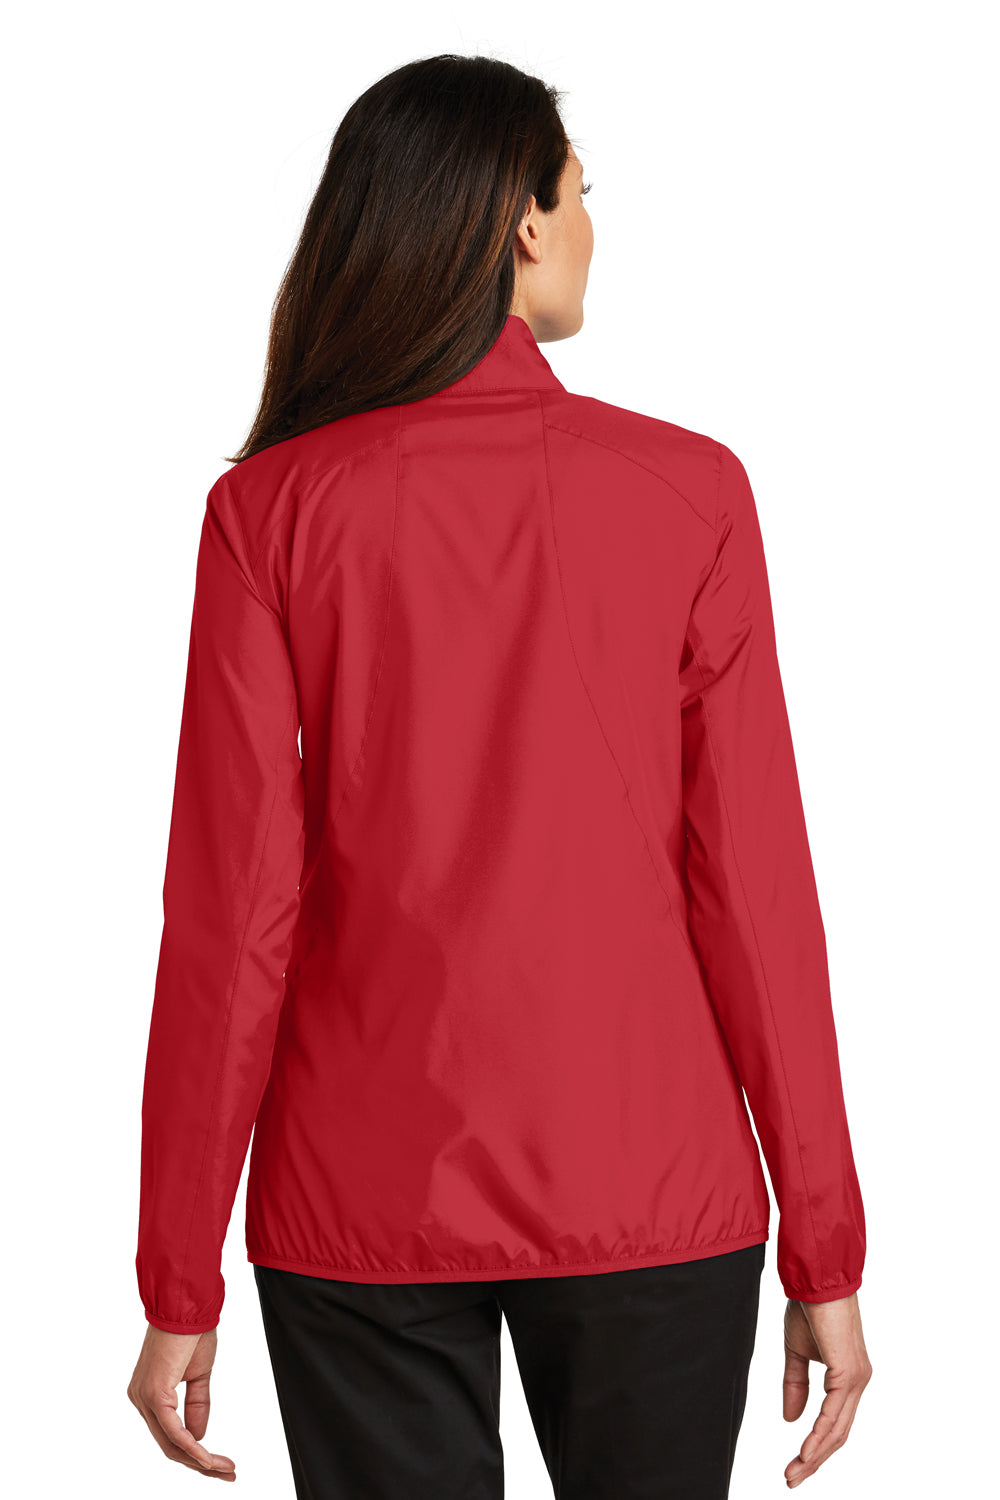 Port Authority L344 Womens Zephyr Wind & Water Resistant Full Zip Jacket Red Back